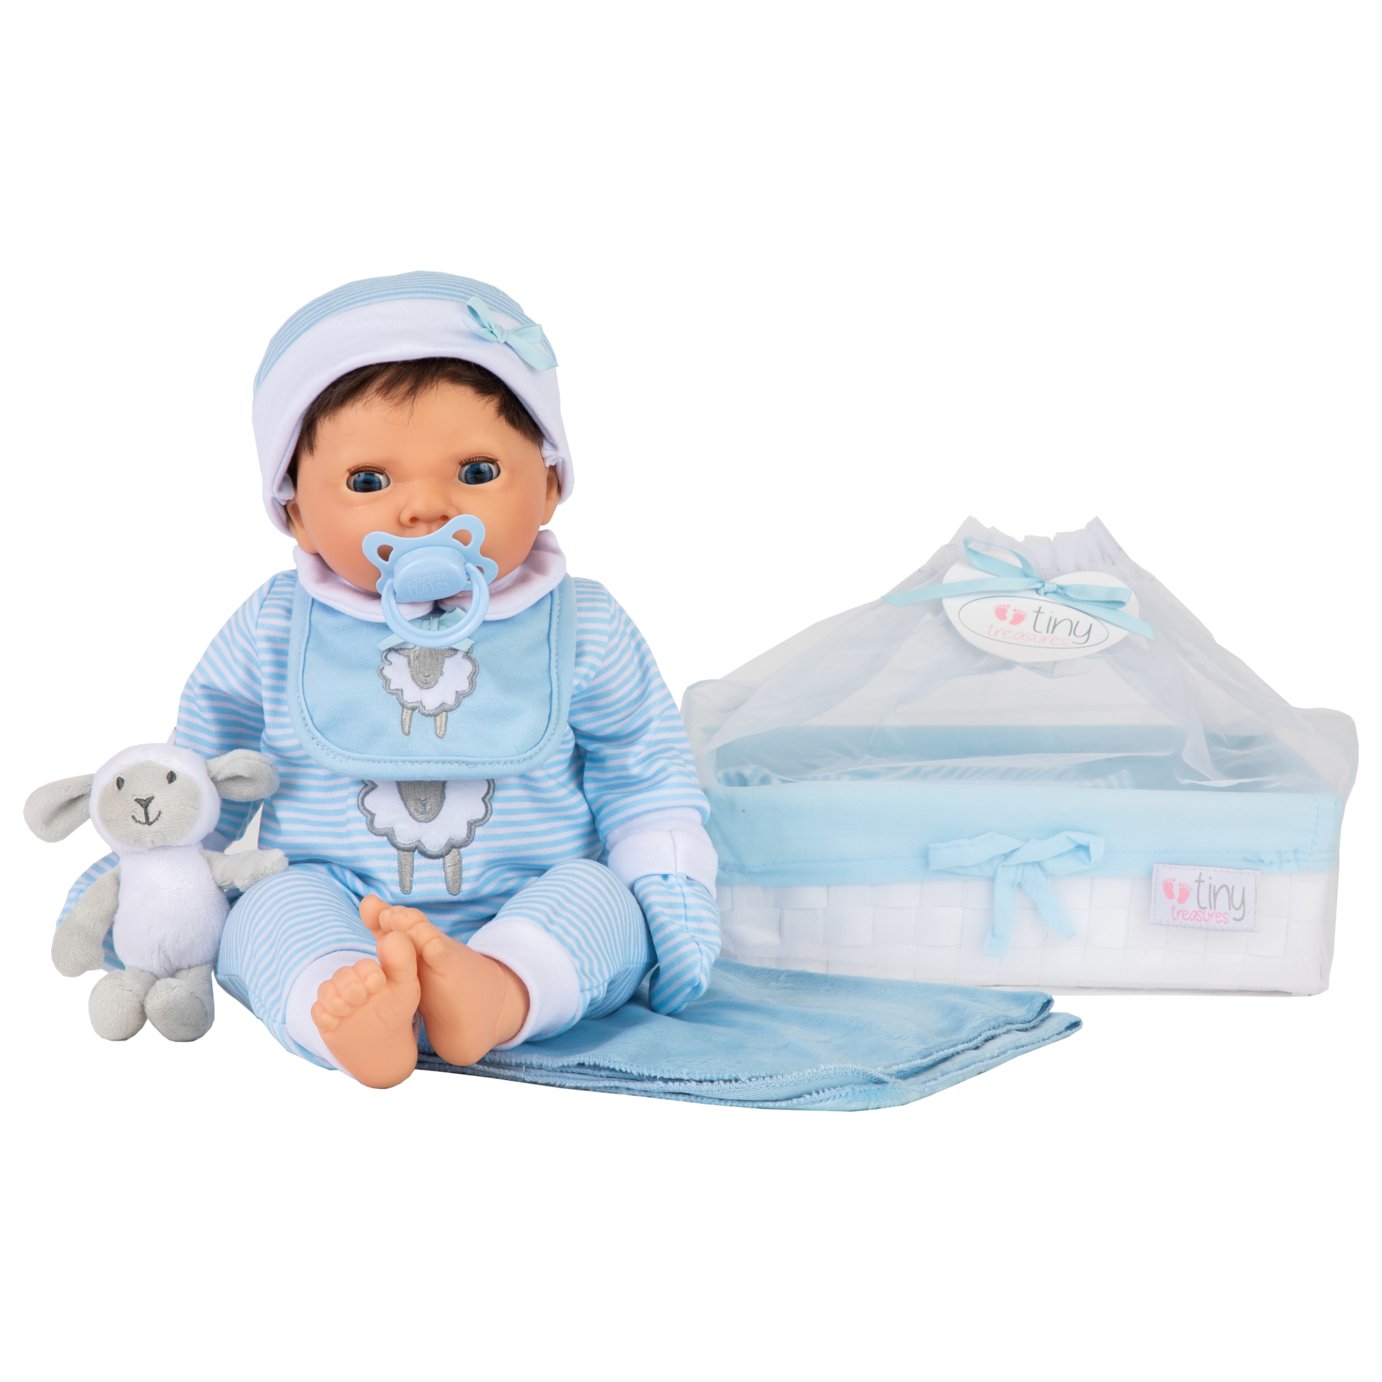 Tiny Treasures Layette Blue Gift Set Review